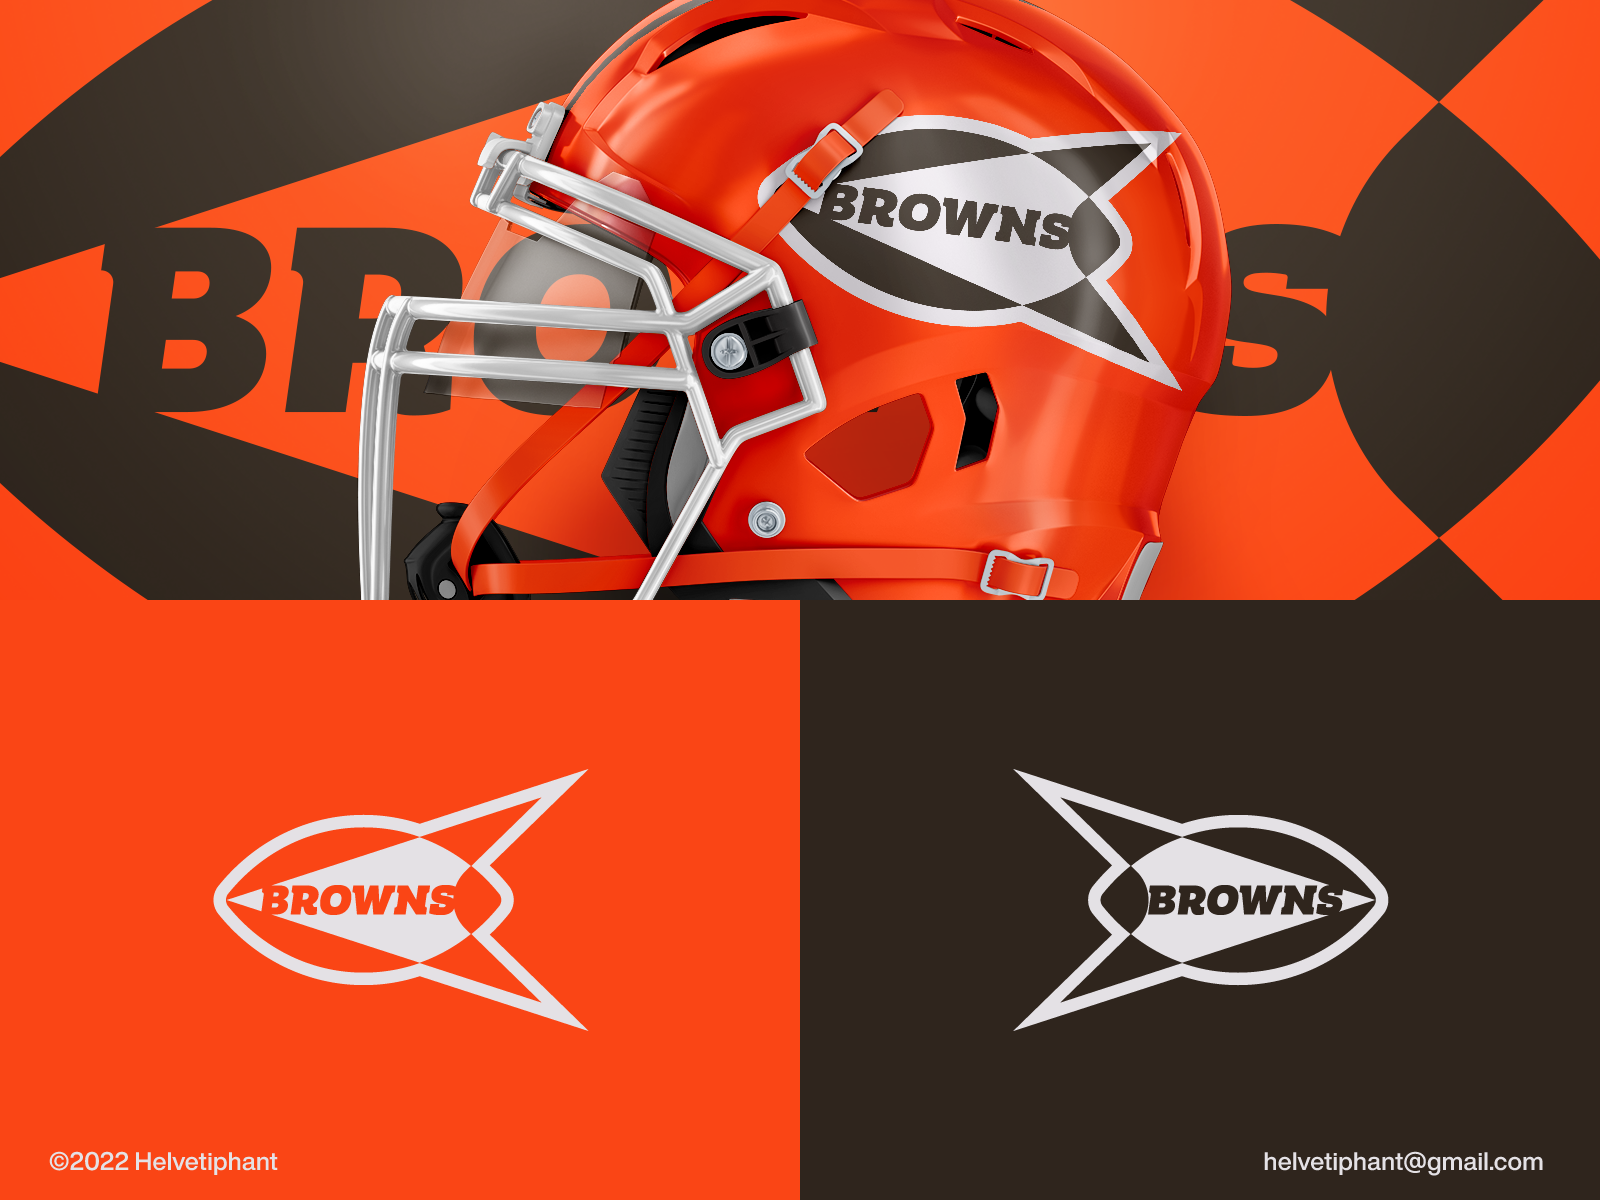 Cleveland Browns - logo redesign concept by Helvetiphant™ on Dribbble